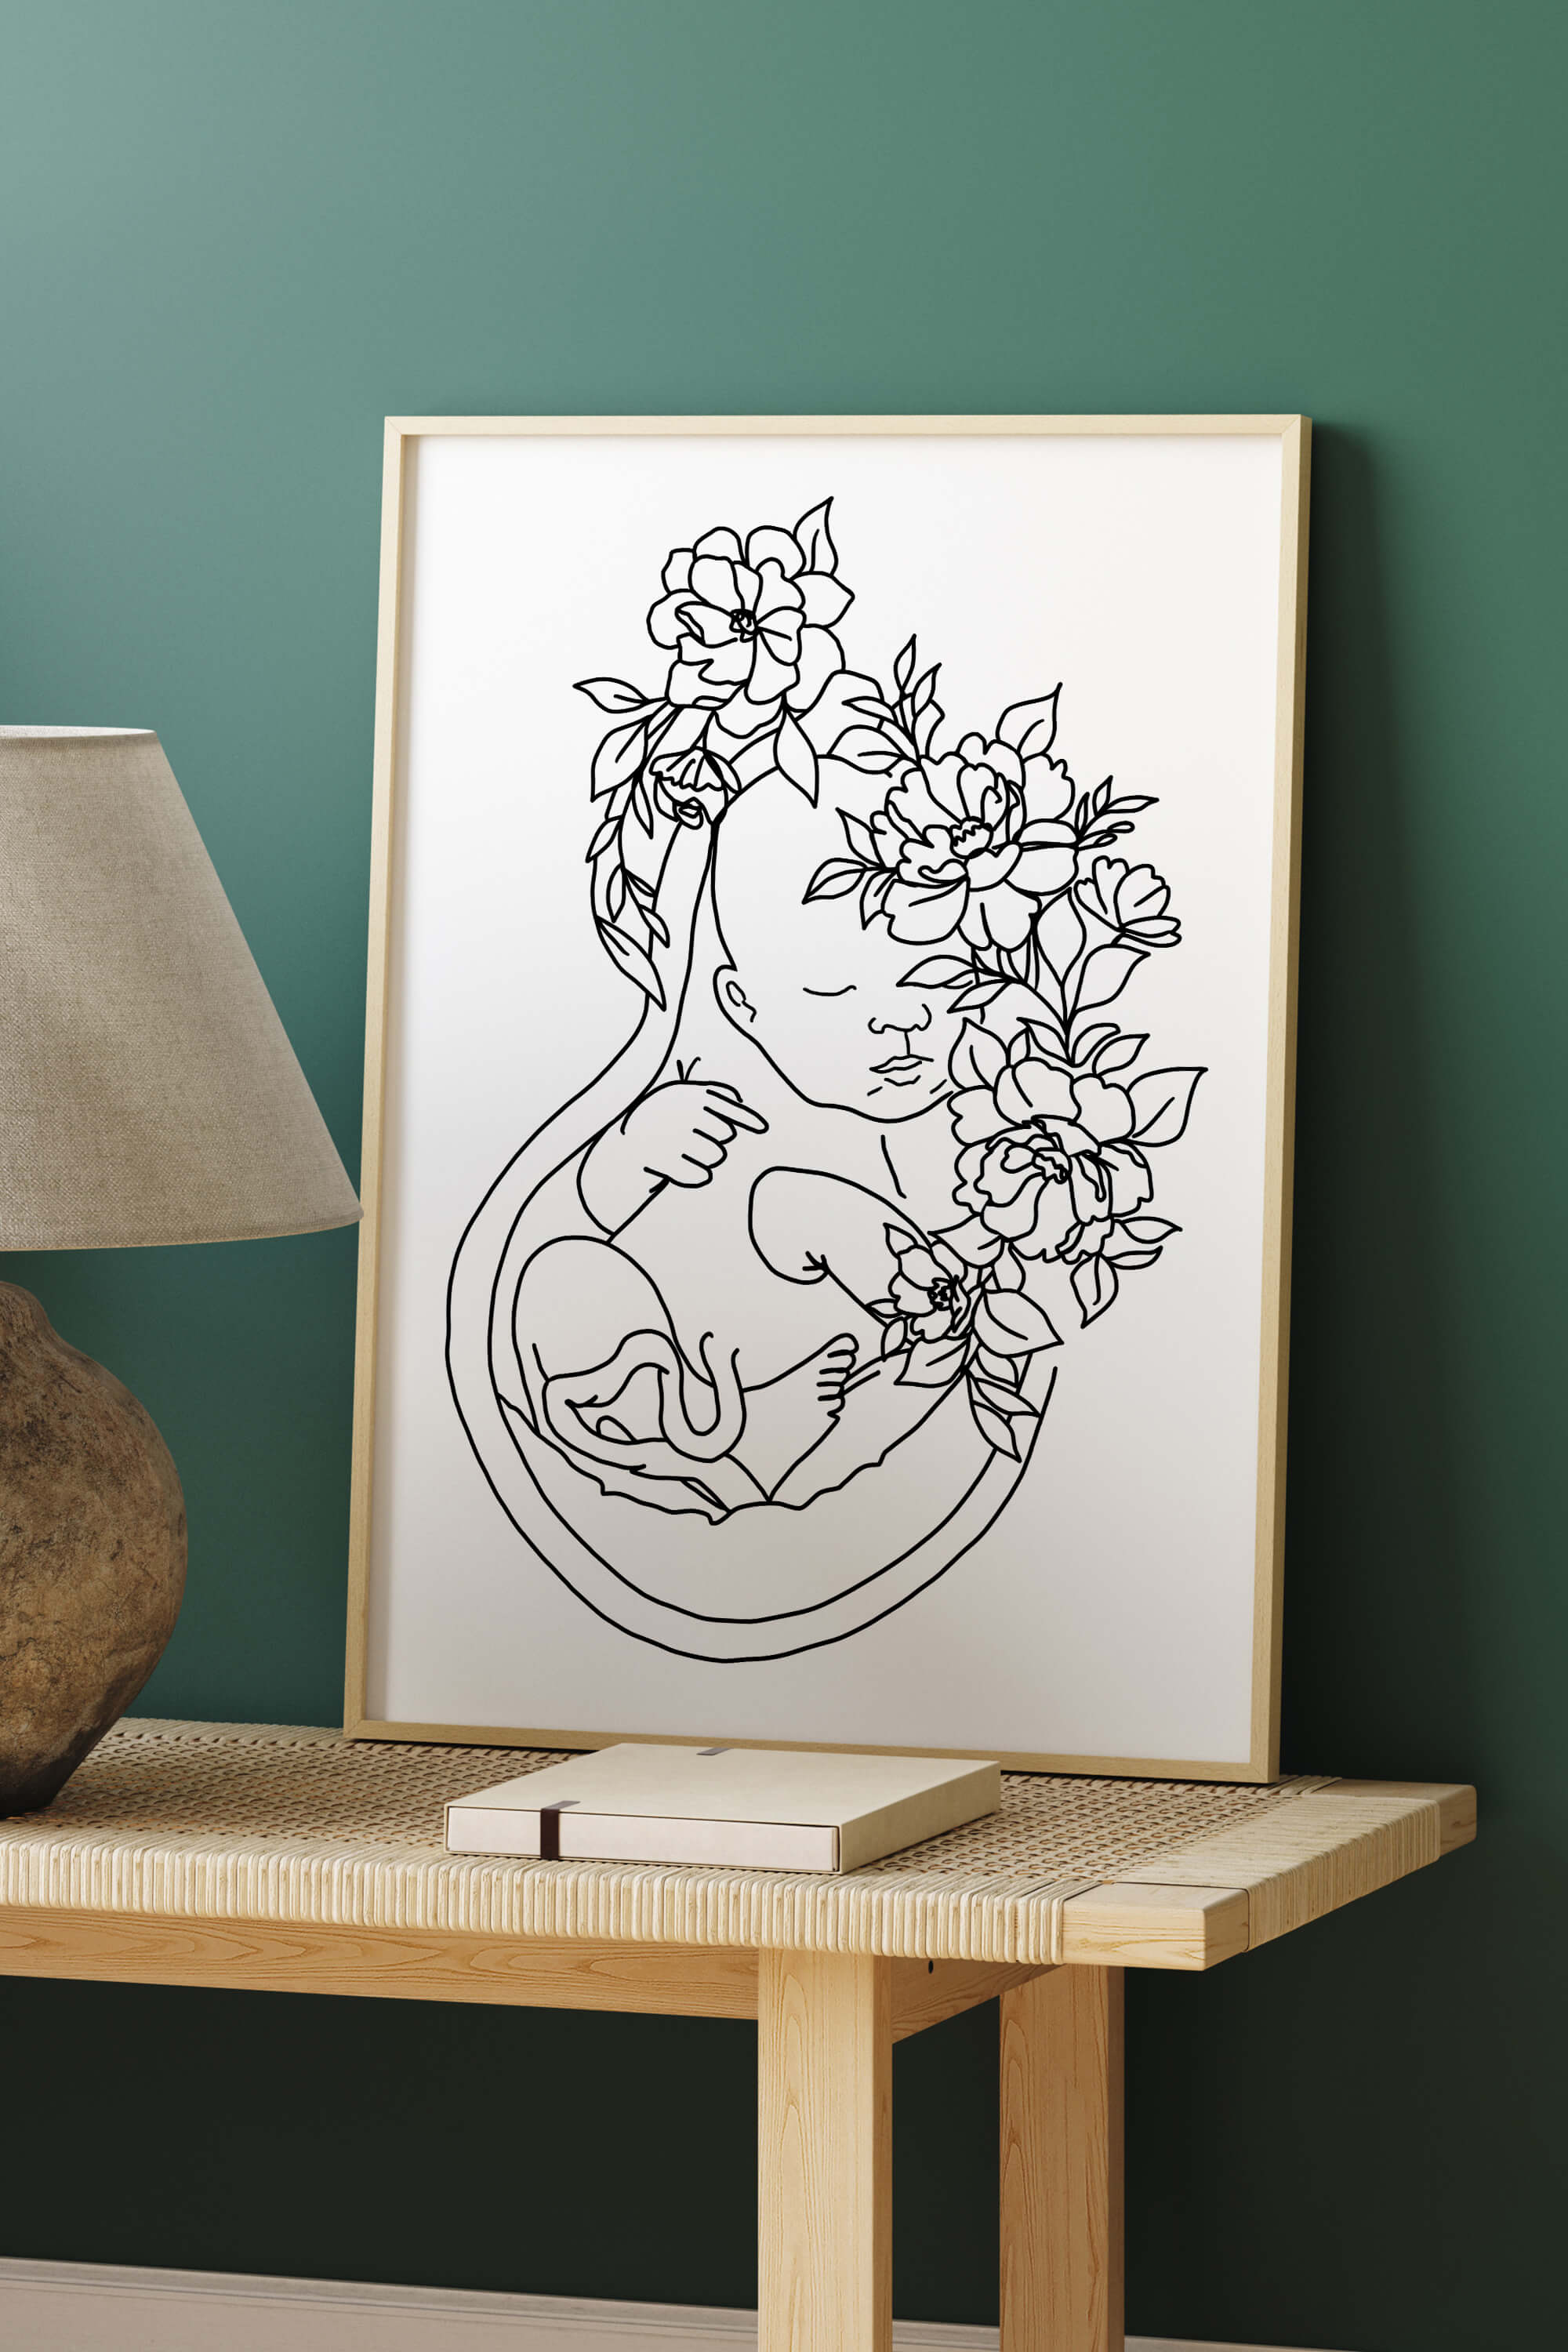 Inspiring blooming life flower uterus poster, capturing the exquisite beauty of life. Add a touch of timeless elegance to your space and immerse yourself in the artistry of this unique and meaningful print.